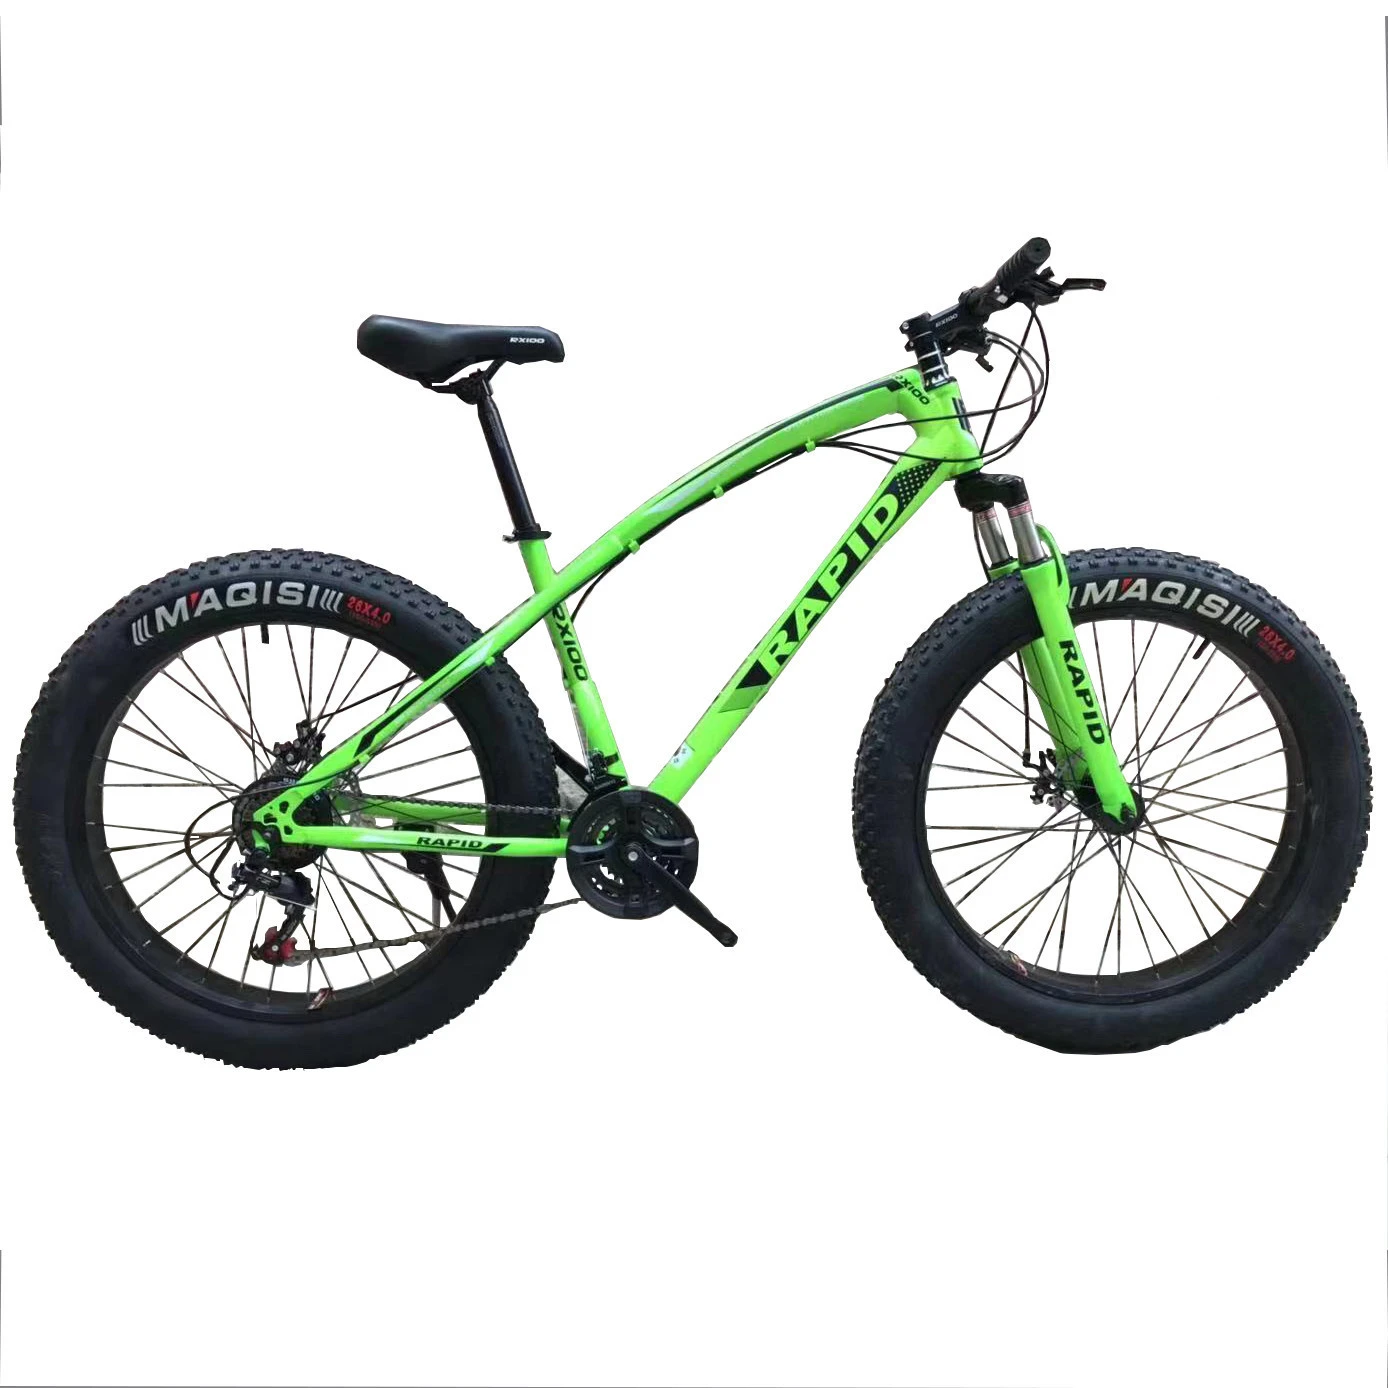 Good supplier 26 inch steel frame 26x4.0  fat bike for sale, import bicycles from china snow bike